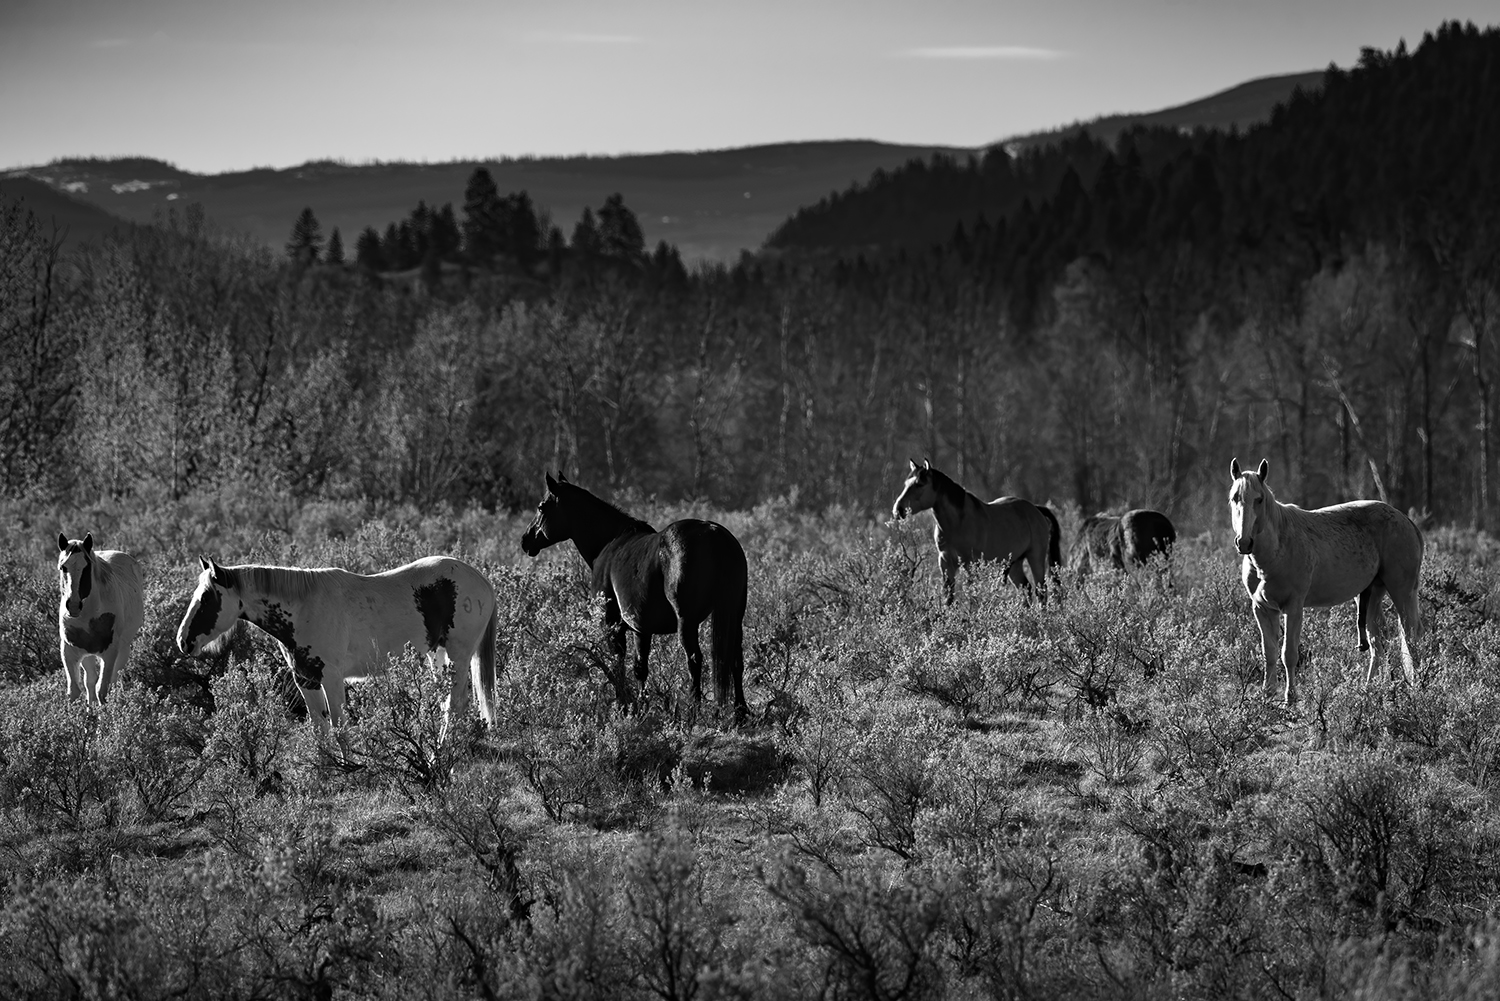 Kamloops grayscale view of mountains with horses and tall grass